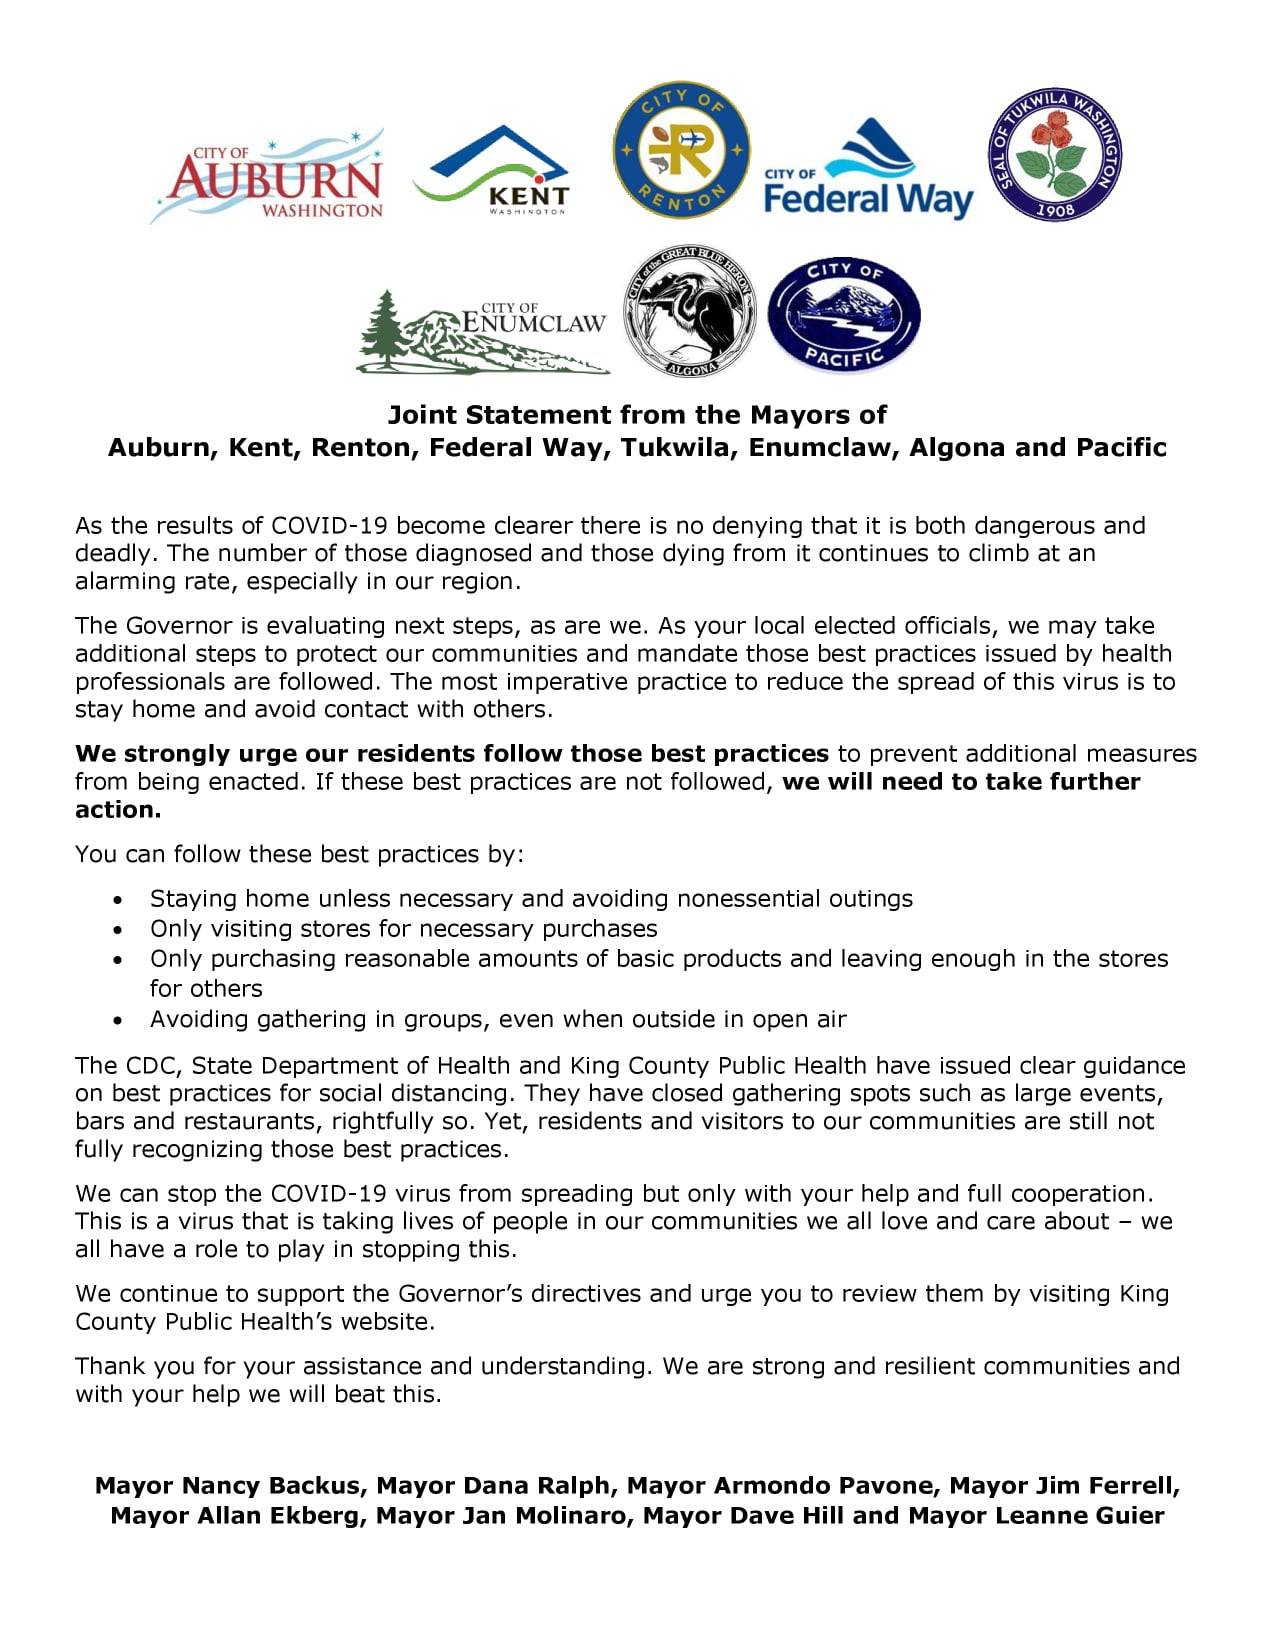 Joint statement from the mayors of Auburn, Kent, Renton, Federal Way, Tukwila, Enumclaw, Algona and Pacific was issued Sunday, March 22, in response to the COVID-19 outbreak. Courtesy of City of Kent